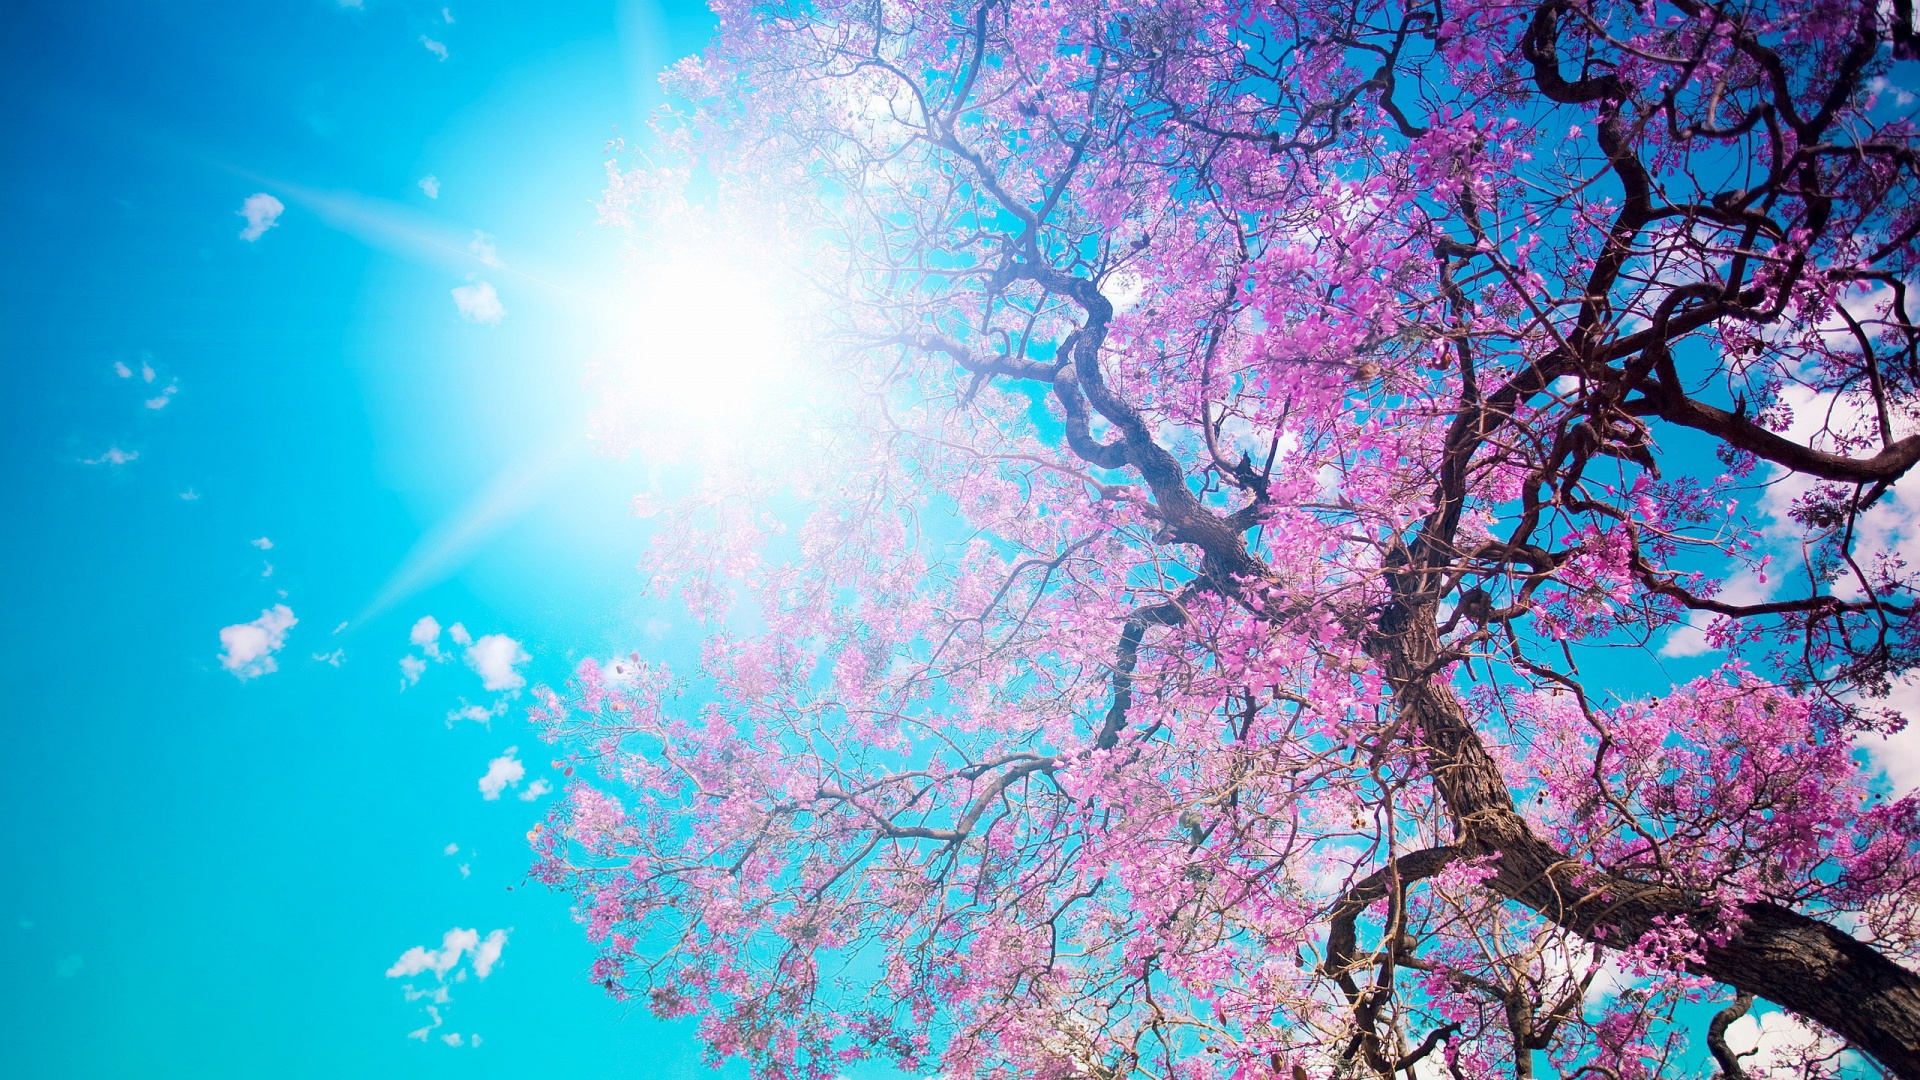 Spring Wallpapers Best Wallpapers